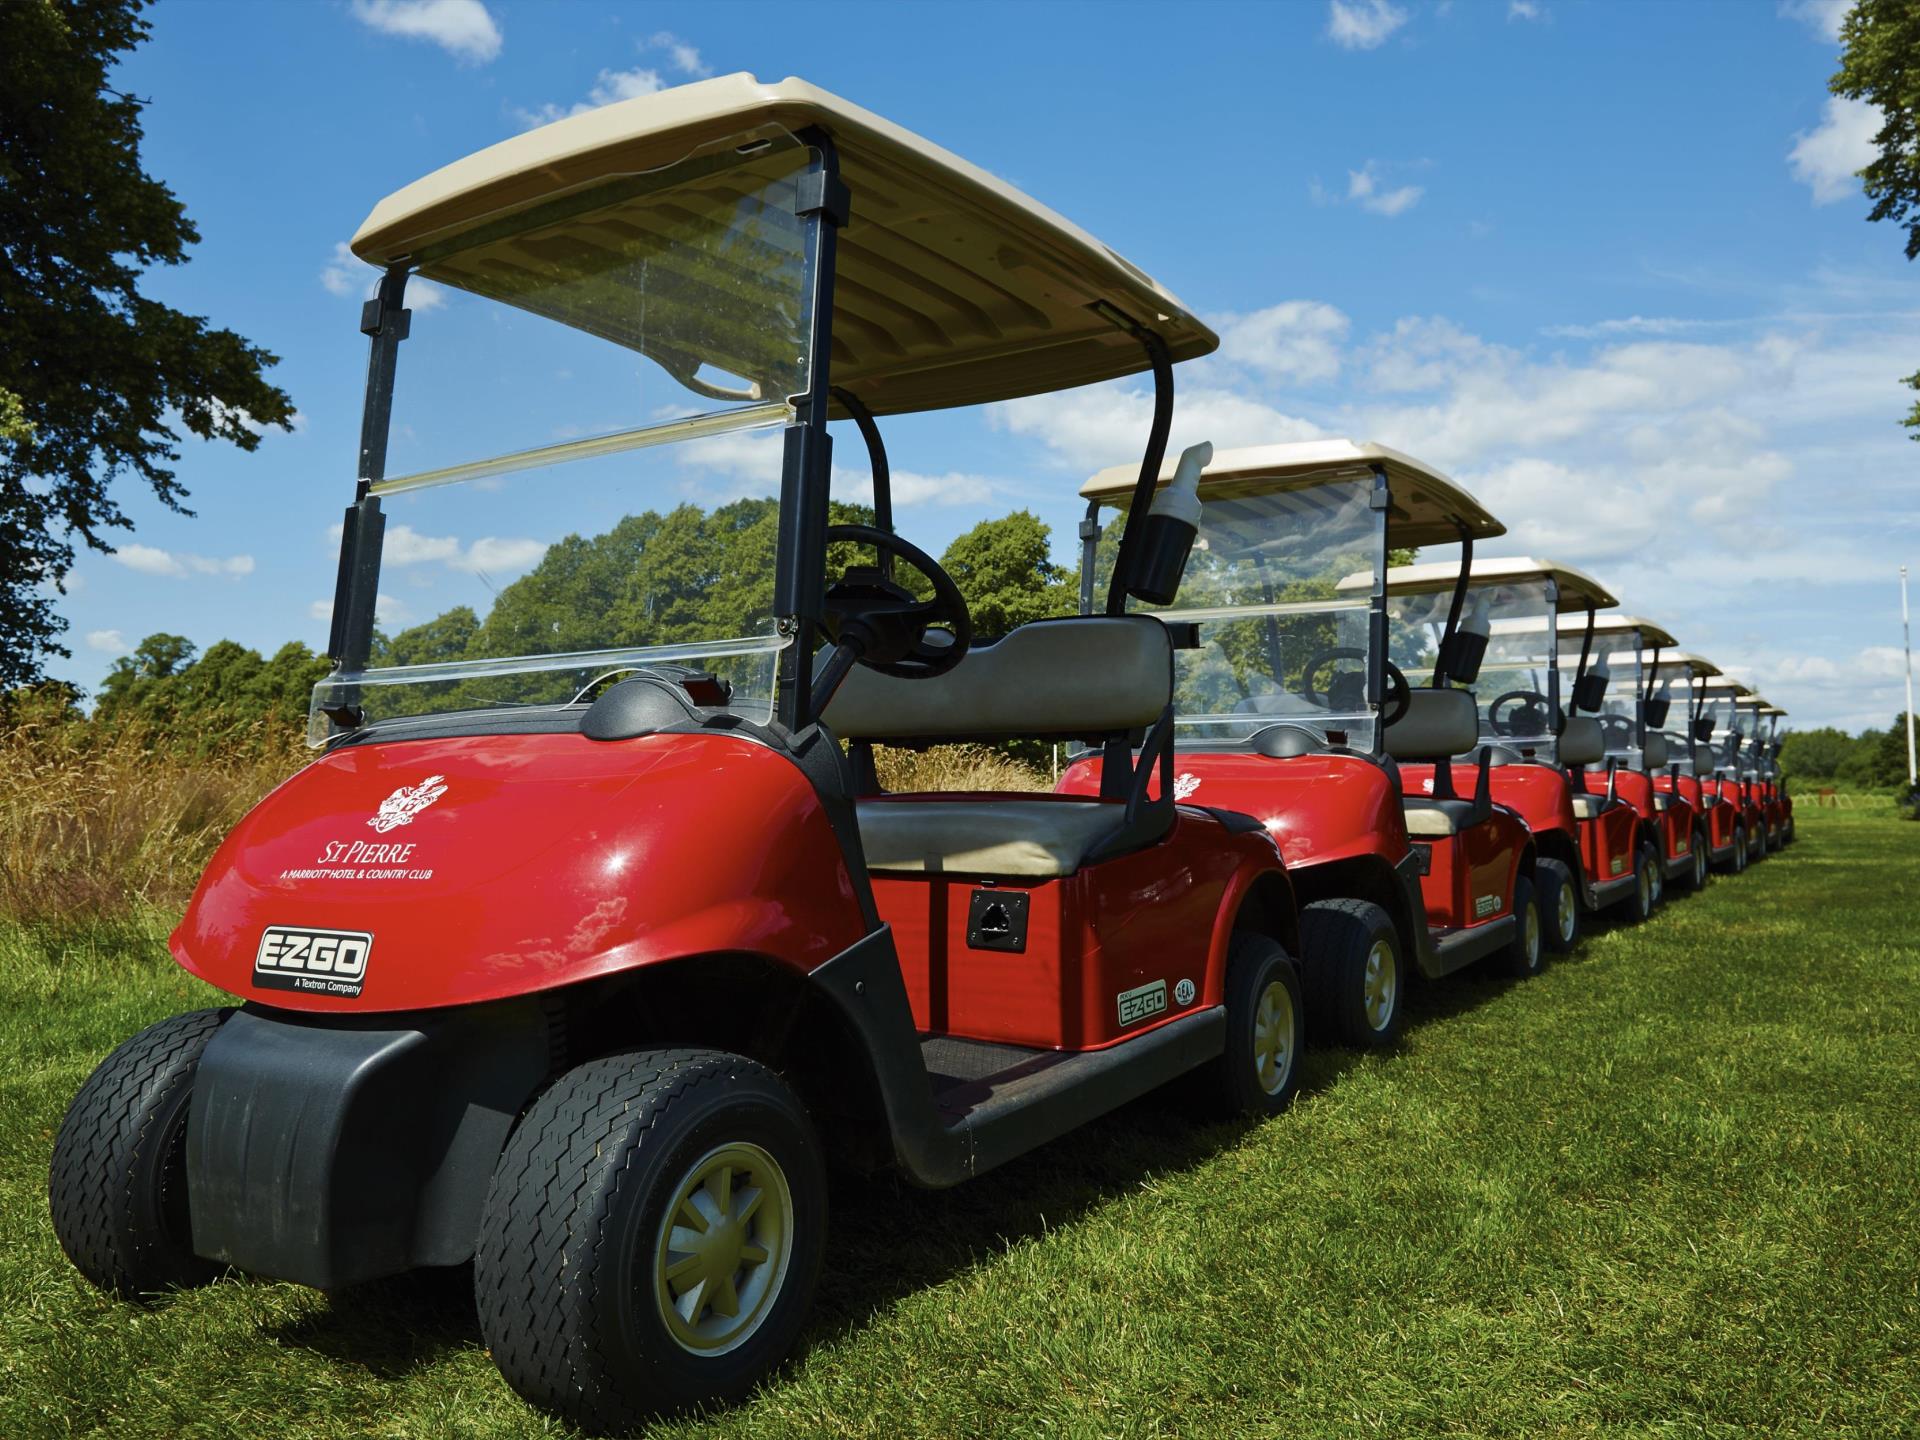 Golf Buggies at St Pierre